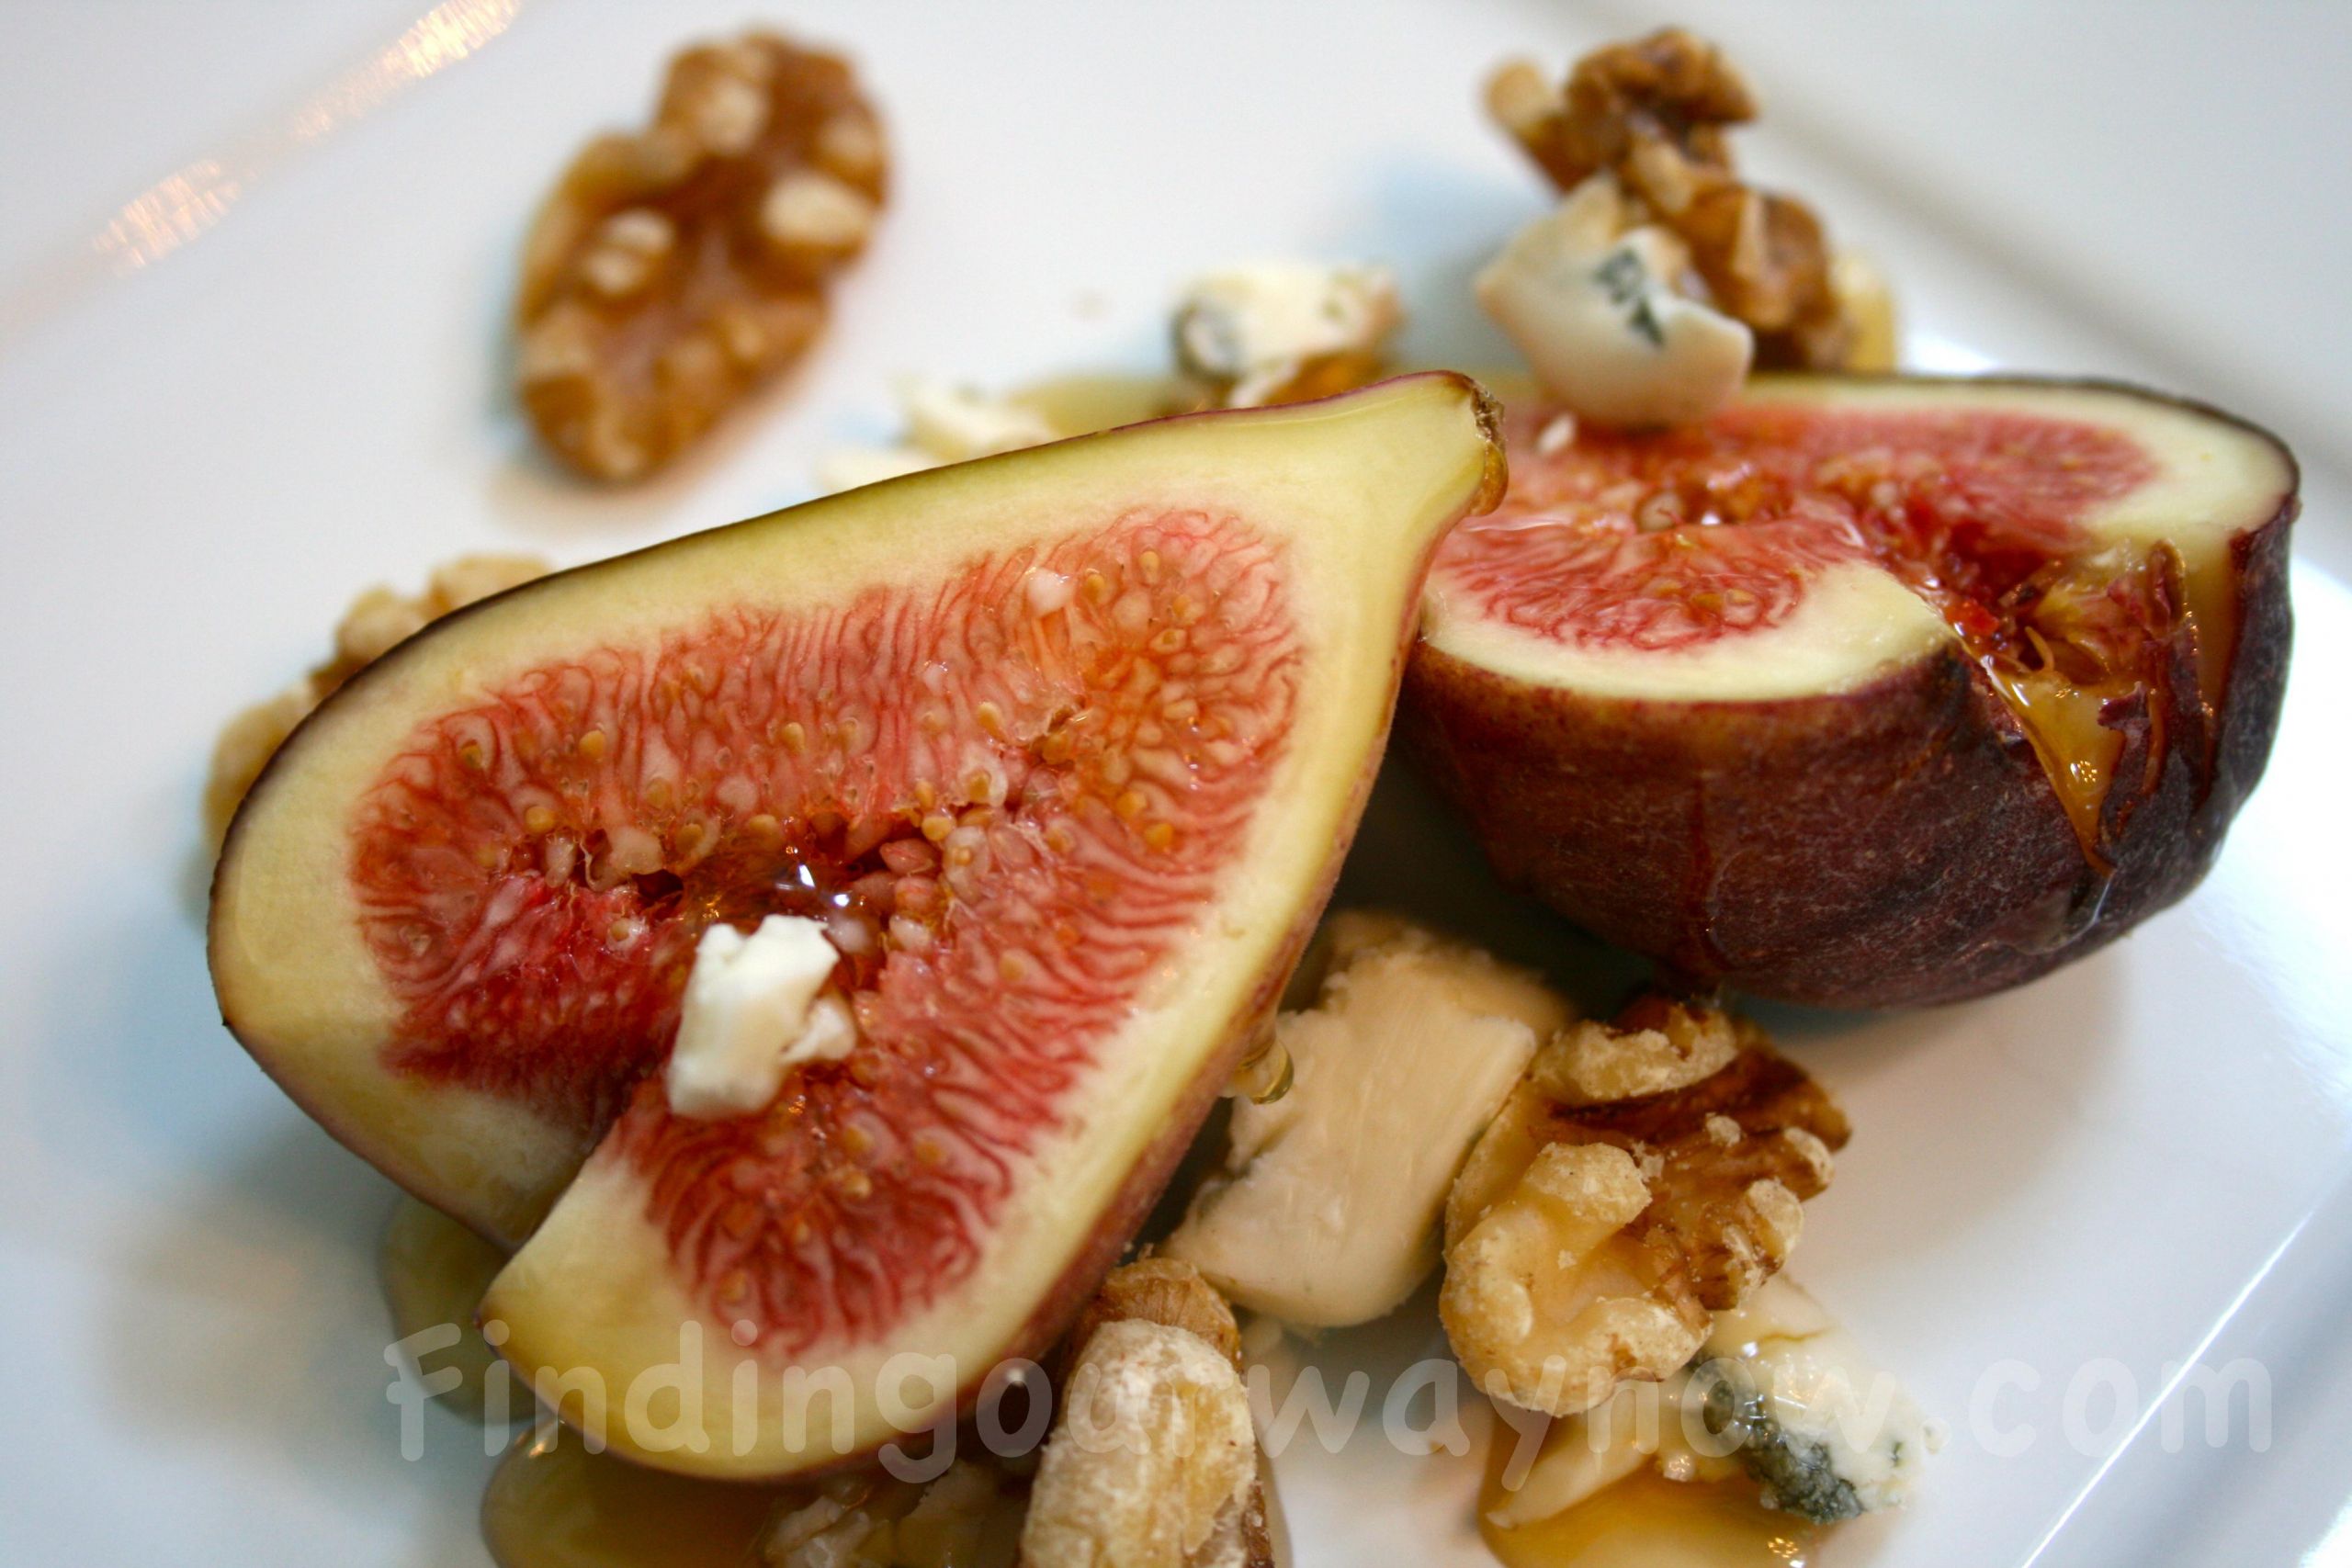 Fig Dessert Recipes
 Fresh Figs and Honey Dessert Recipe Finding Our Way Now